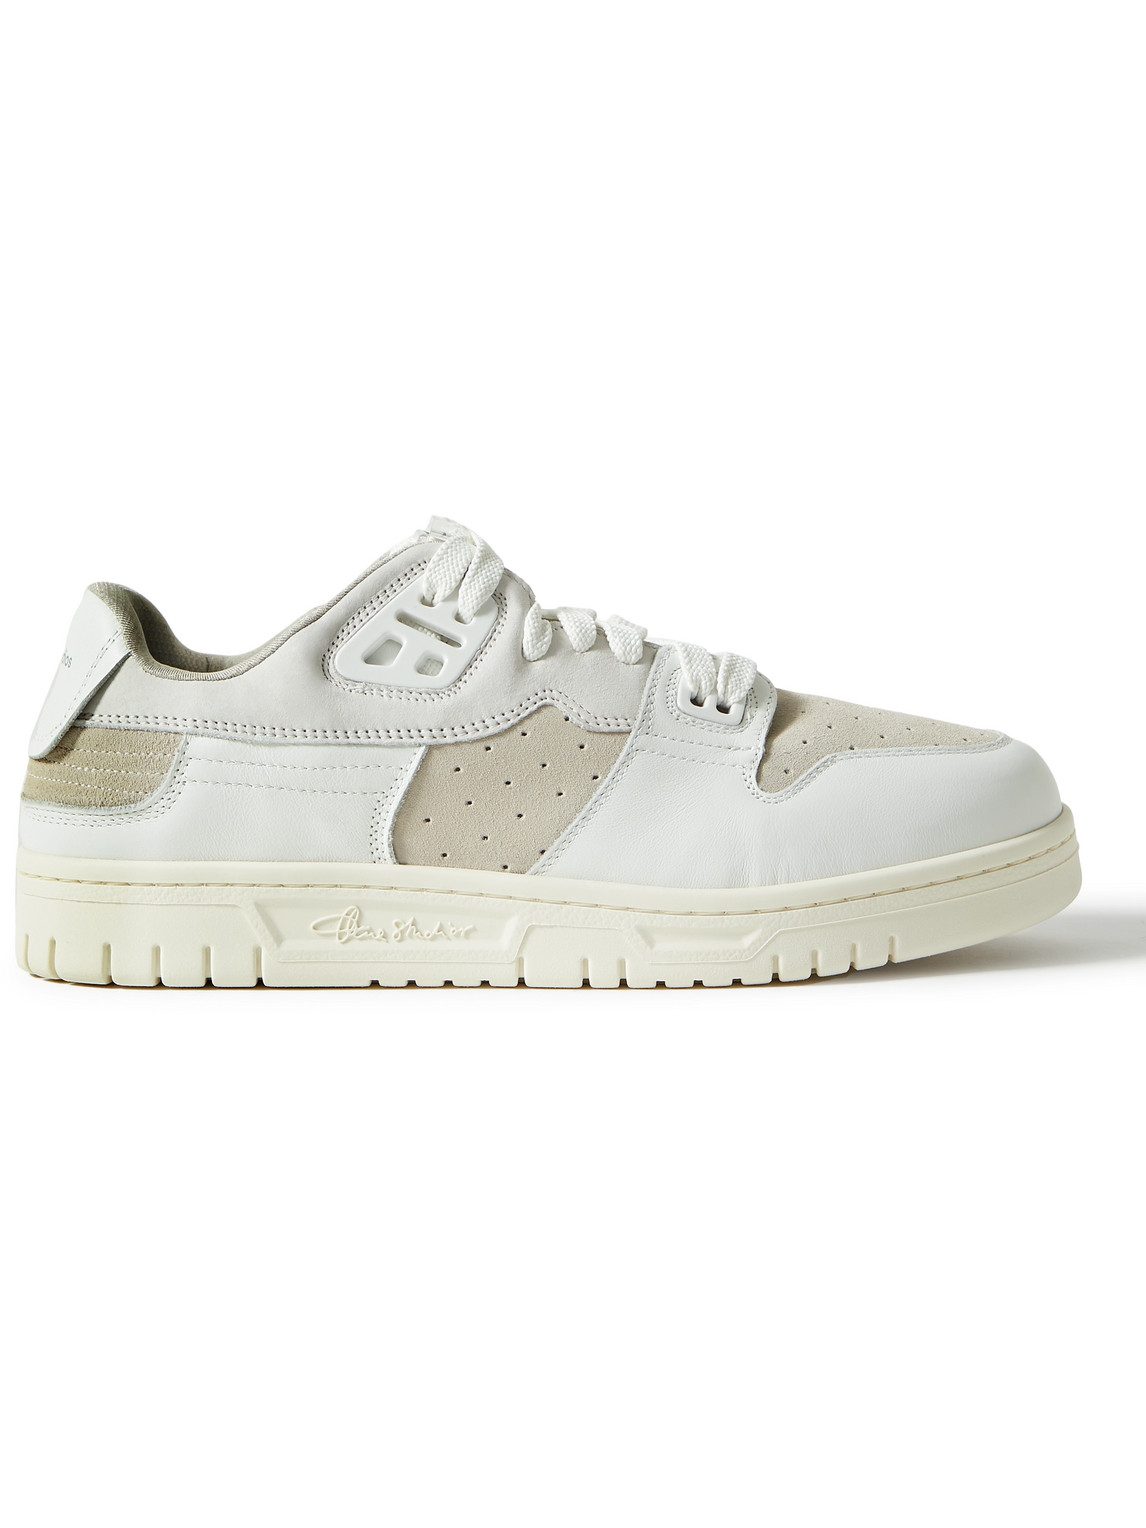 Acne Studios White & Off-white Leather Low-top Sneakers